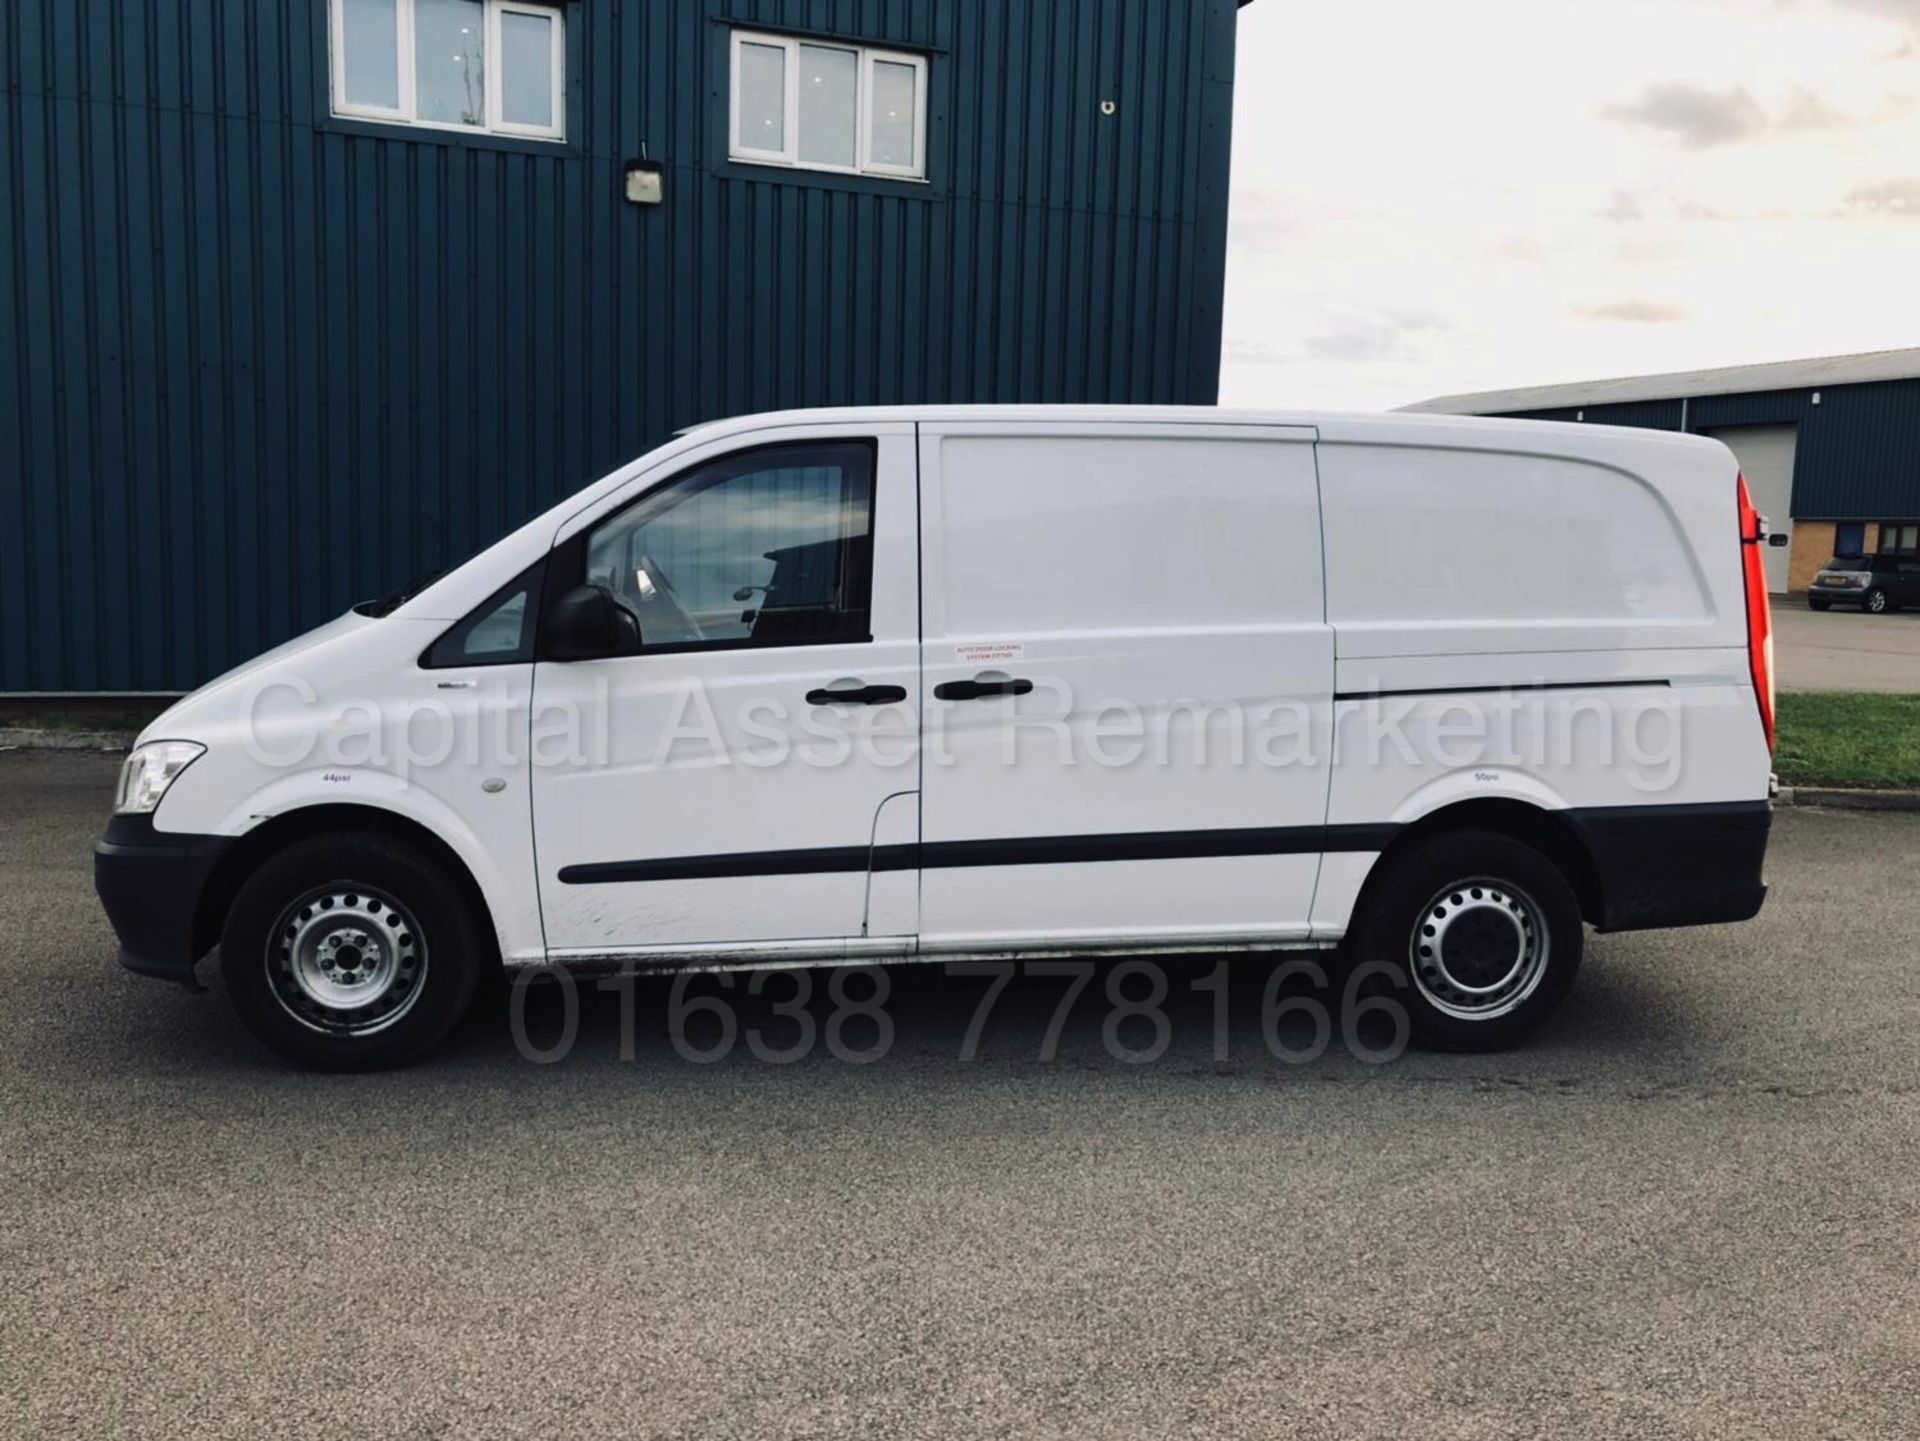 MERCEDES VITO 113CDI LWB (2015 MODEL - NEW SHAPE) 1 OWNER - LOW MILES - ELEC PACK - 130BHP - 6 SPEED - Image 4 of 30